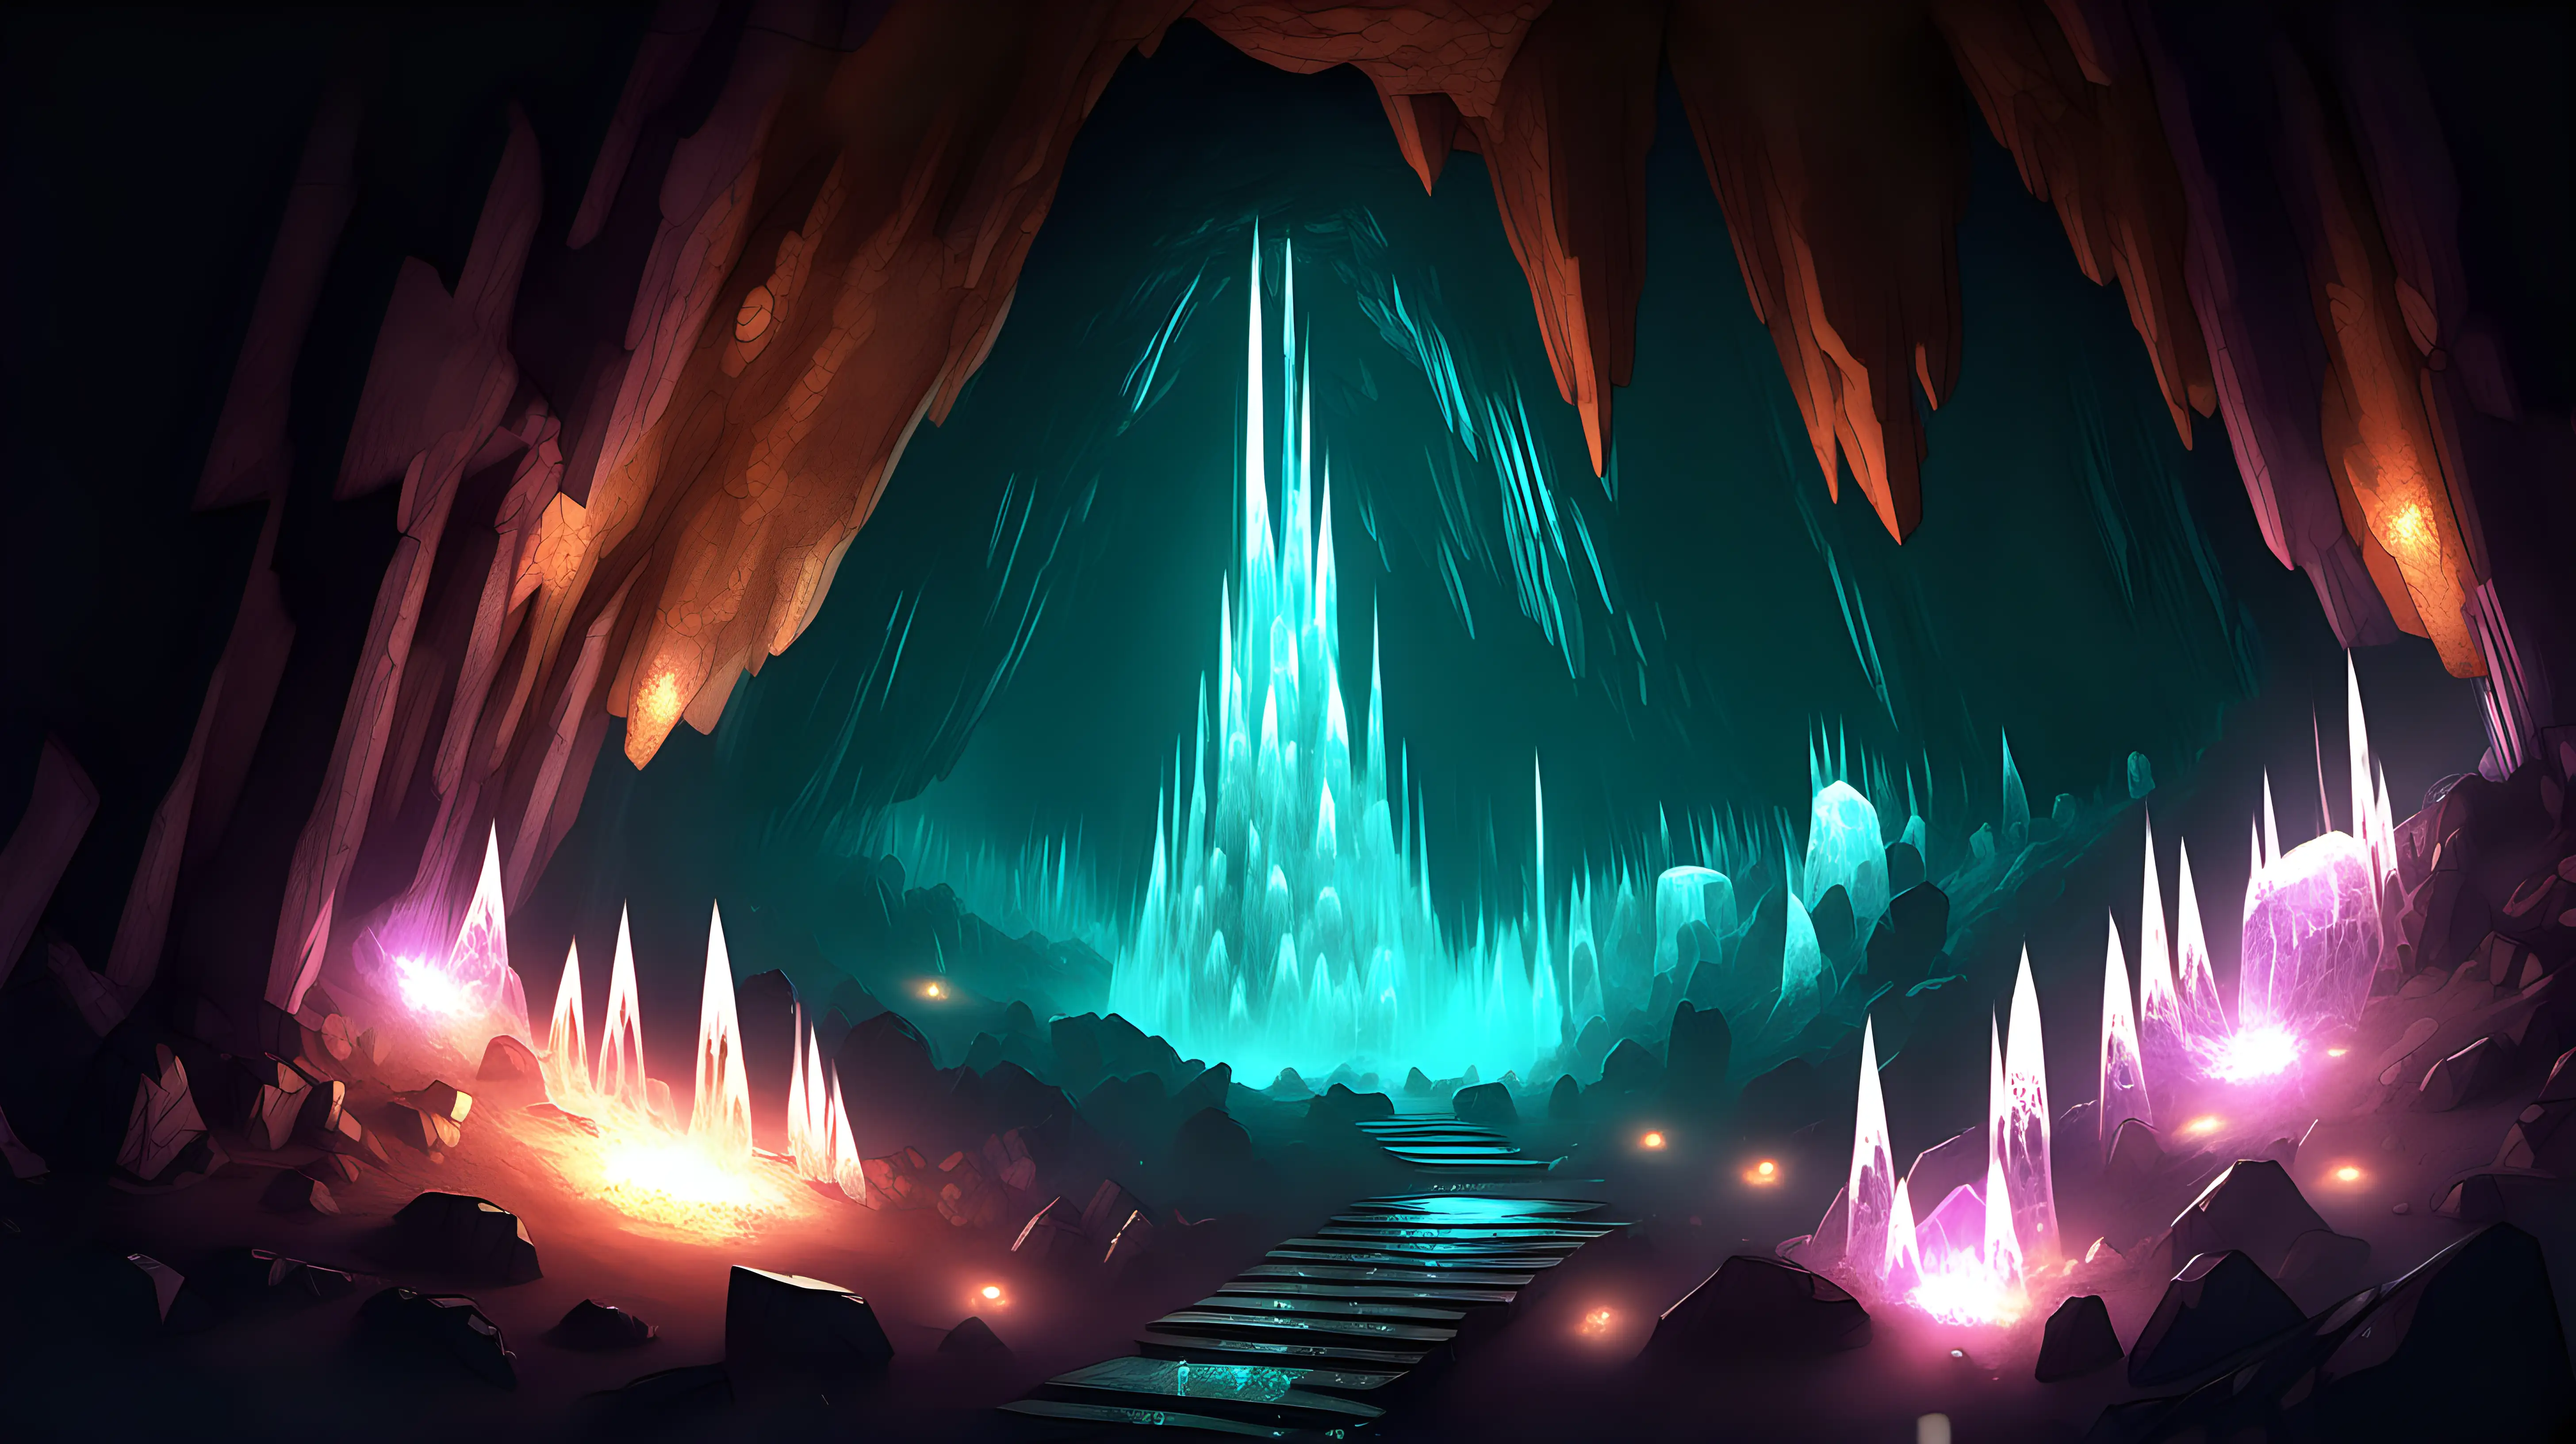 Subterranean cave system with glowing crystals.